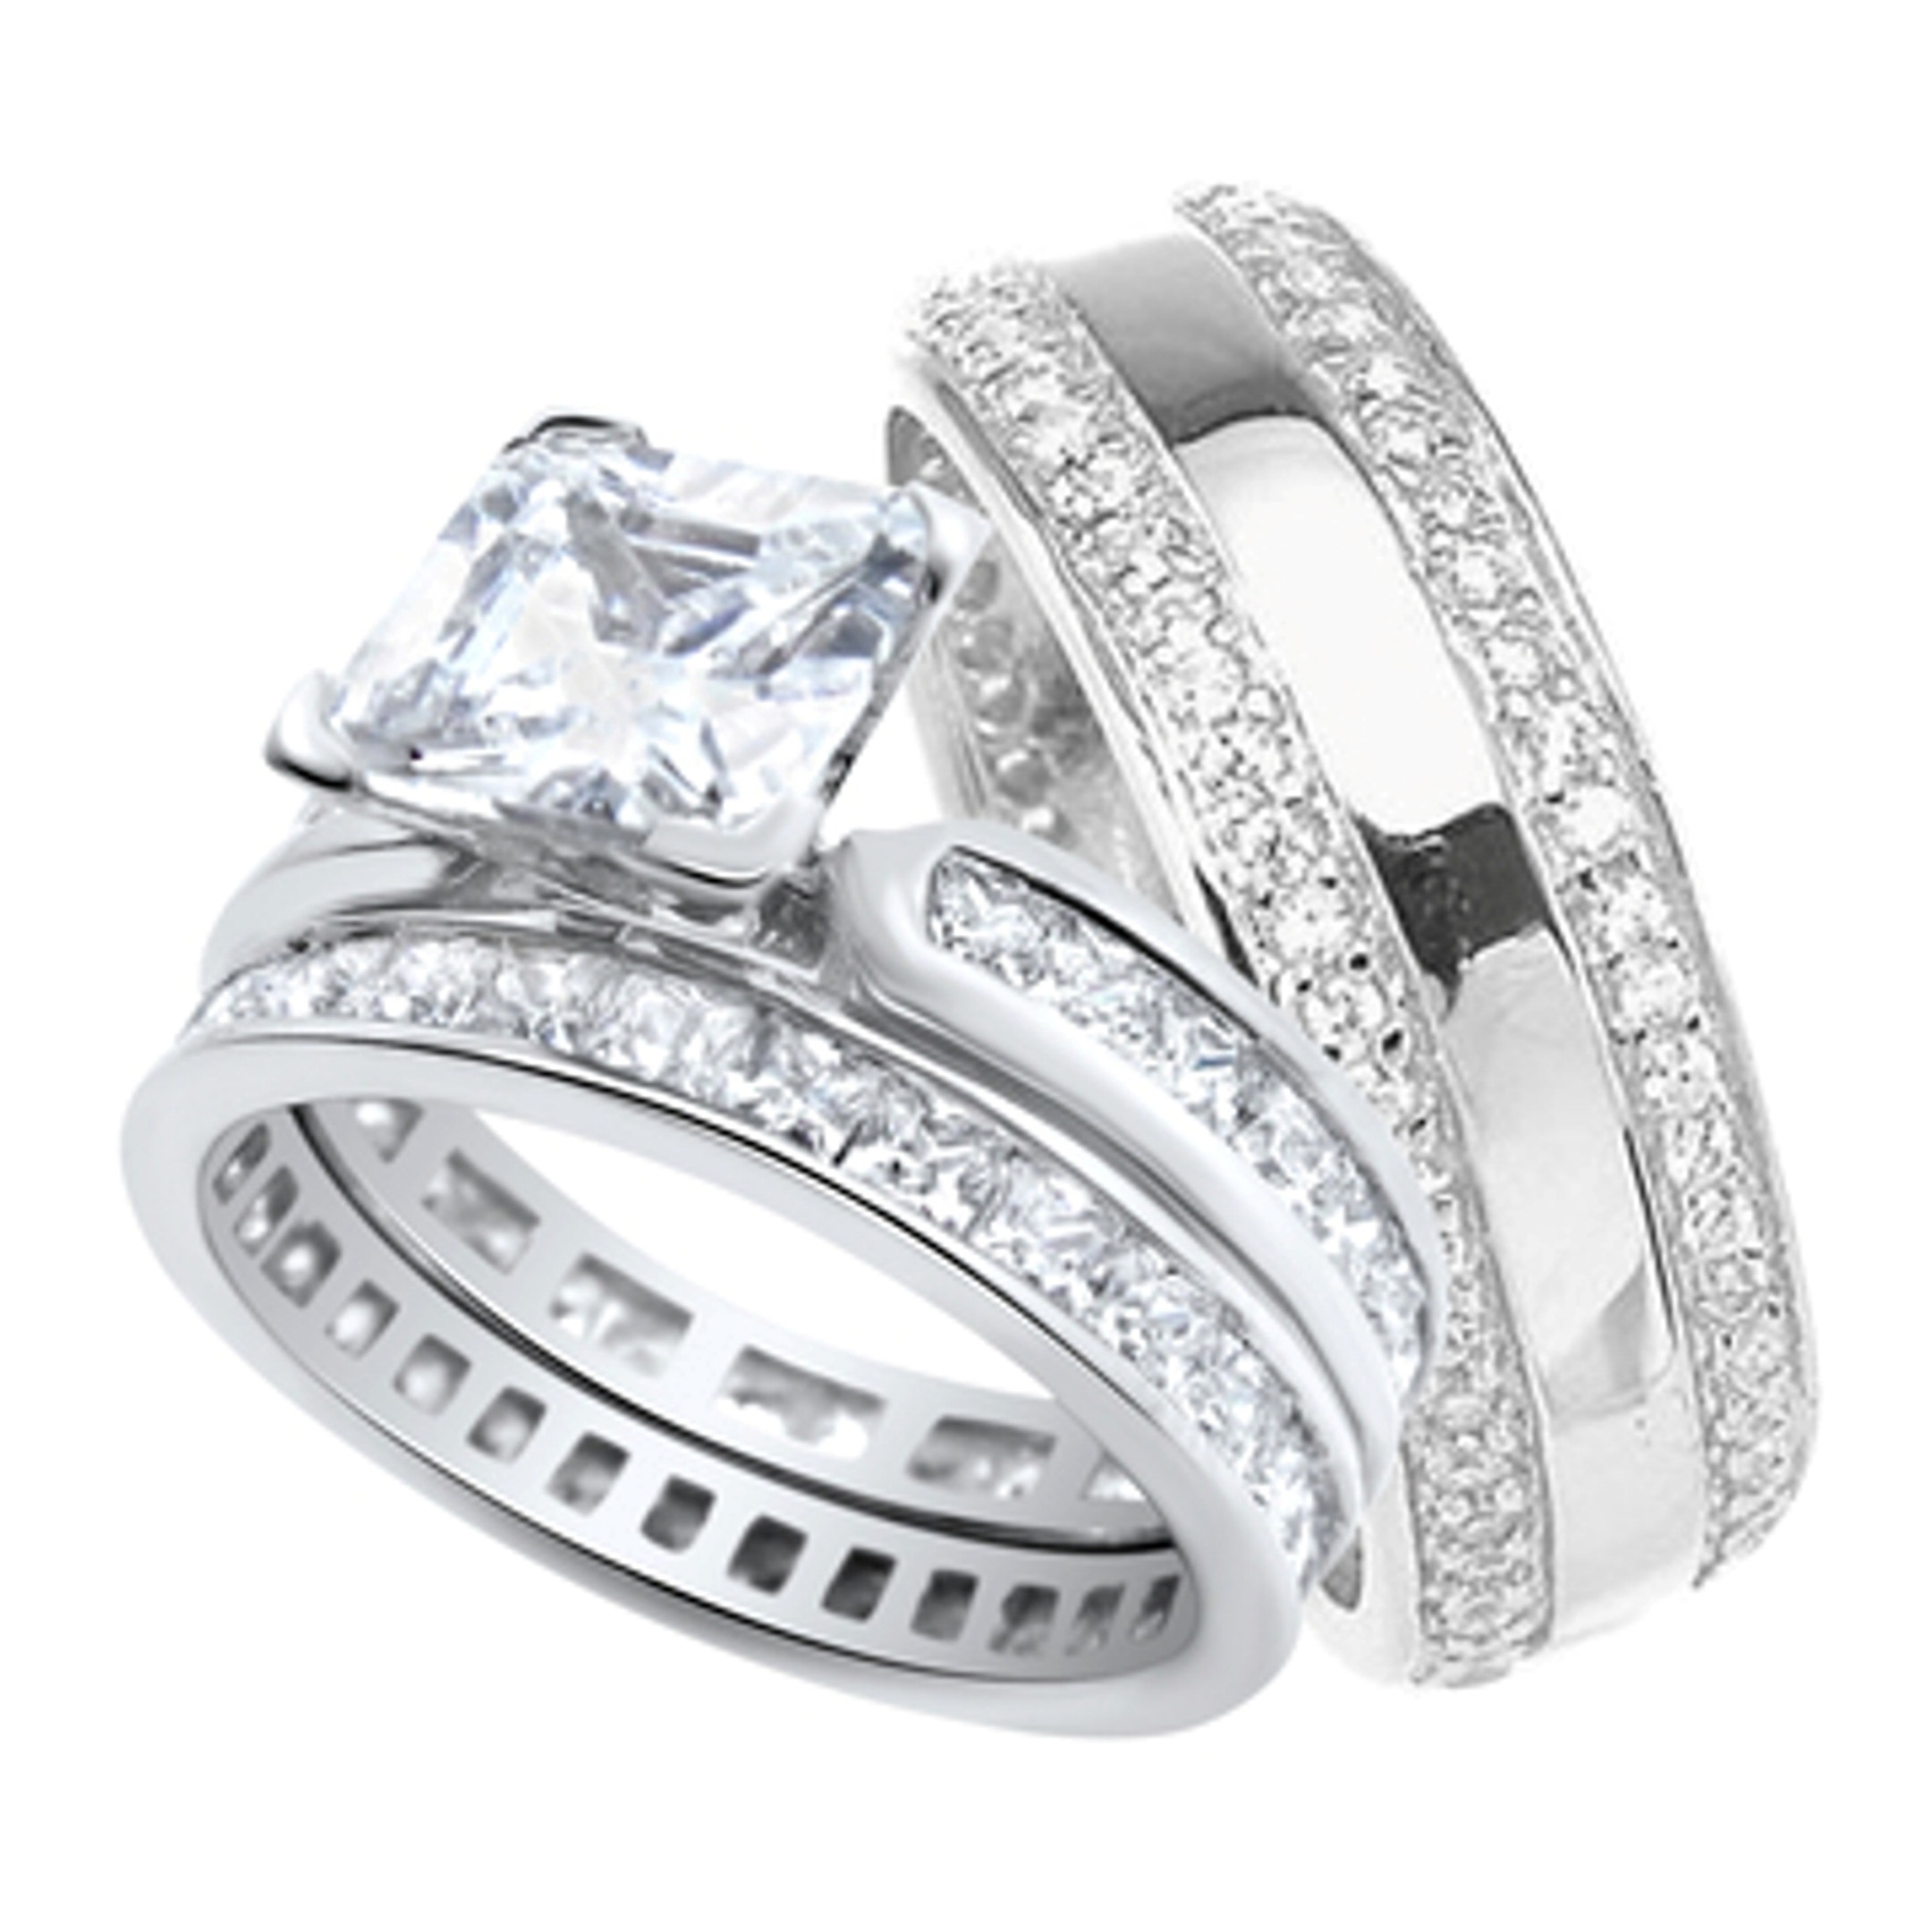 Wedding Rings Sets At Walmart
 His and Hers Wedding Ring Set Matching Sterling Silver